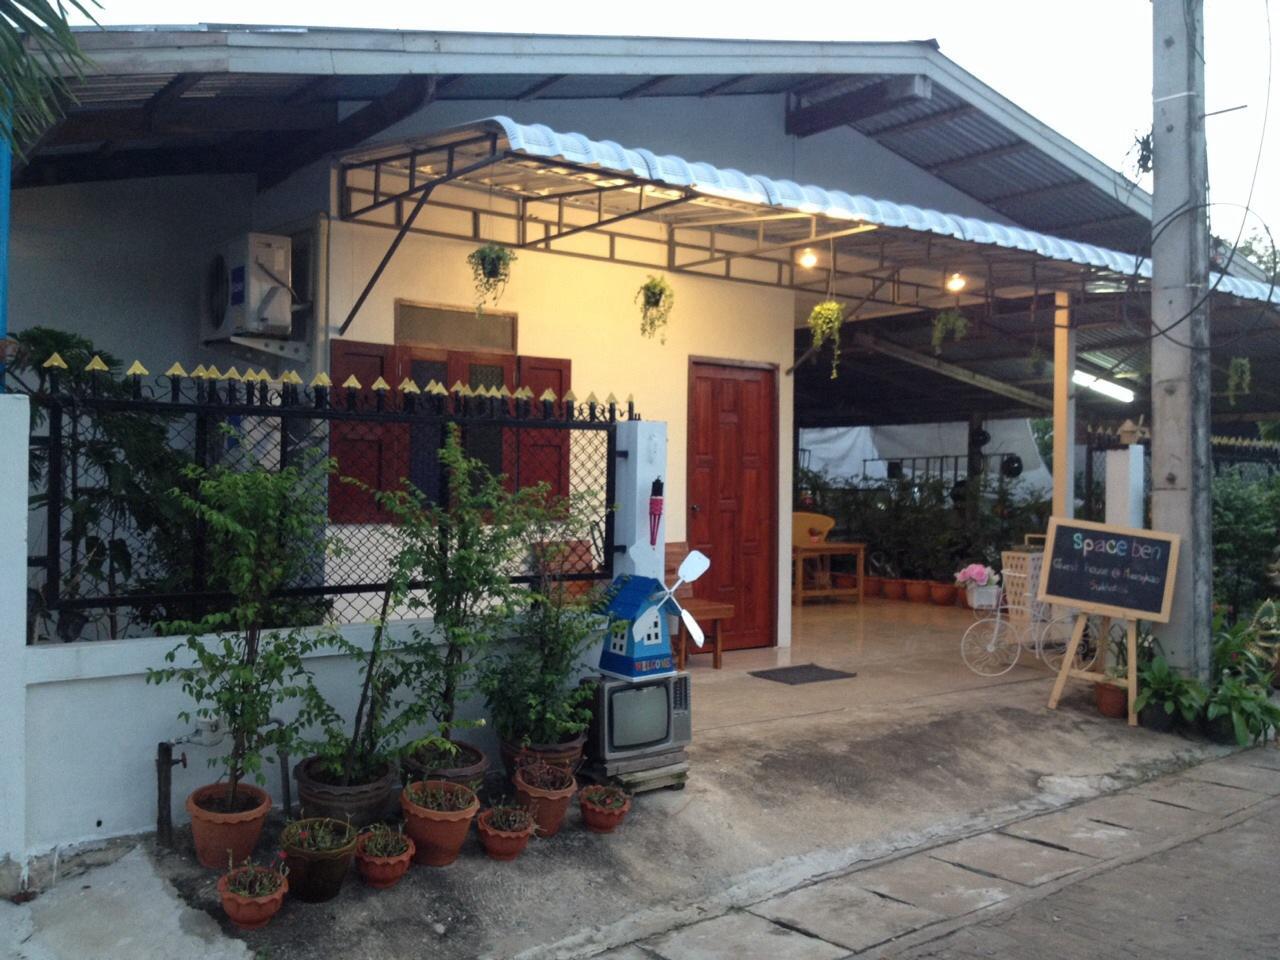 Space Ben Guesthouse @ Muangkao Thailand FAQ 2016, What facilities are there in Space Ben Guesthouse @ Muangkao Thailand 2016, What Languages Spoken are Supported in Space Ben Guesthouse @ Muangkao Thailand 2016, Which payment cards are accepted in Space Ben Guesthouse @ Muangkao Thailand , Thailand Space Ben Guesthouse @ Muangkao room facilities and services Q&A 2016, Thailand Space Ben Guesthouse @ Muangkao online booking services 2016, Thailand Space Ben Guesthouse @ Muangkao address 2016, Thailand Space Ben Guesthouse @ Muangkao telephone number 2016,Thailand Space Ben Guesthouse @ Muangkao map 2016, Thailand Space Ben Guesthouse @ Muangkao traffic guide 2016, how to go Thailand Space Ben Guesthouse @ Muangkao, Thailand Space Ben Guesthouse @ Muangkao booking online 2016, Thailand Space Ben Guesthouse @ Muangkao room types 2016.